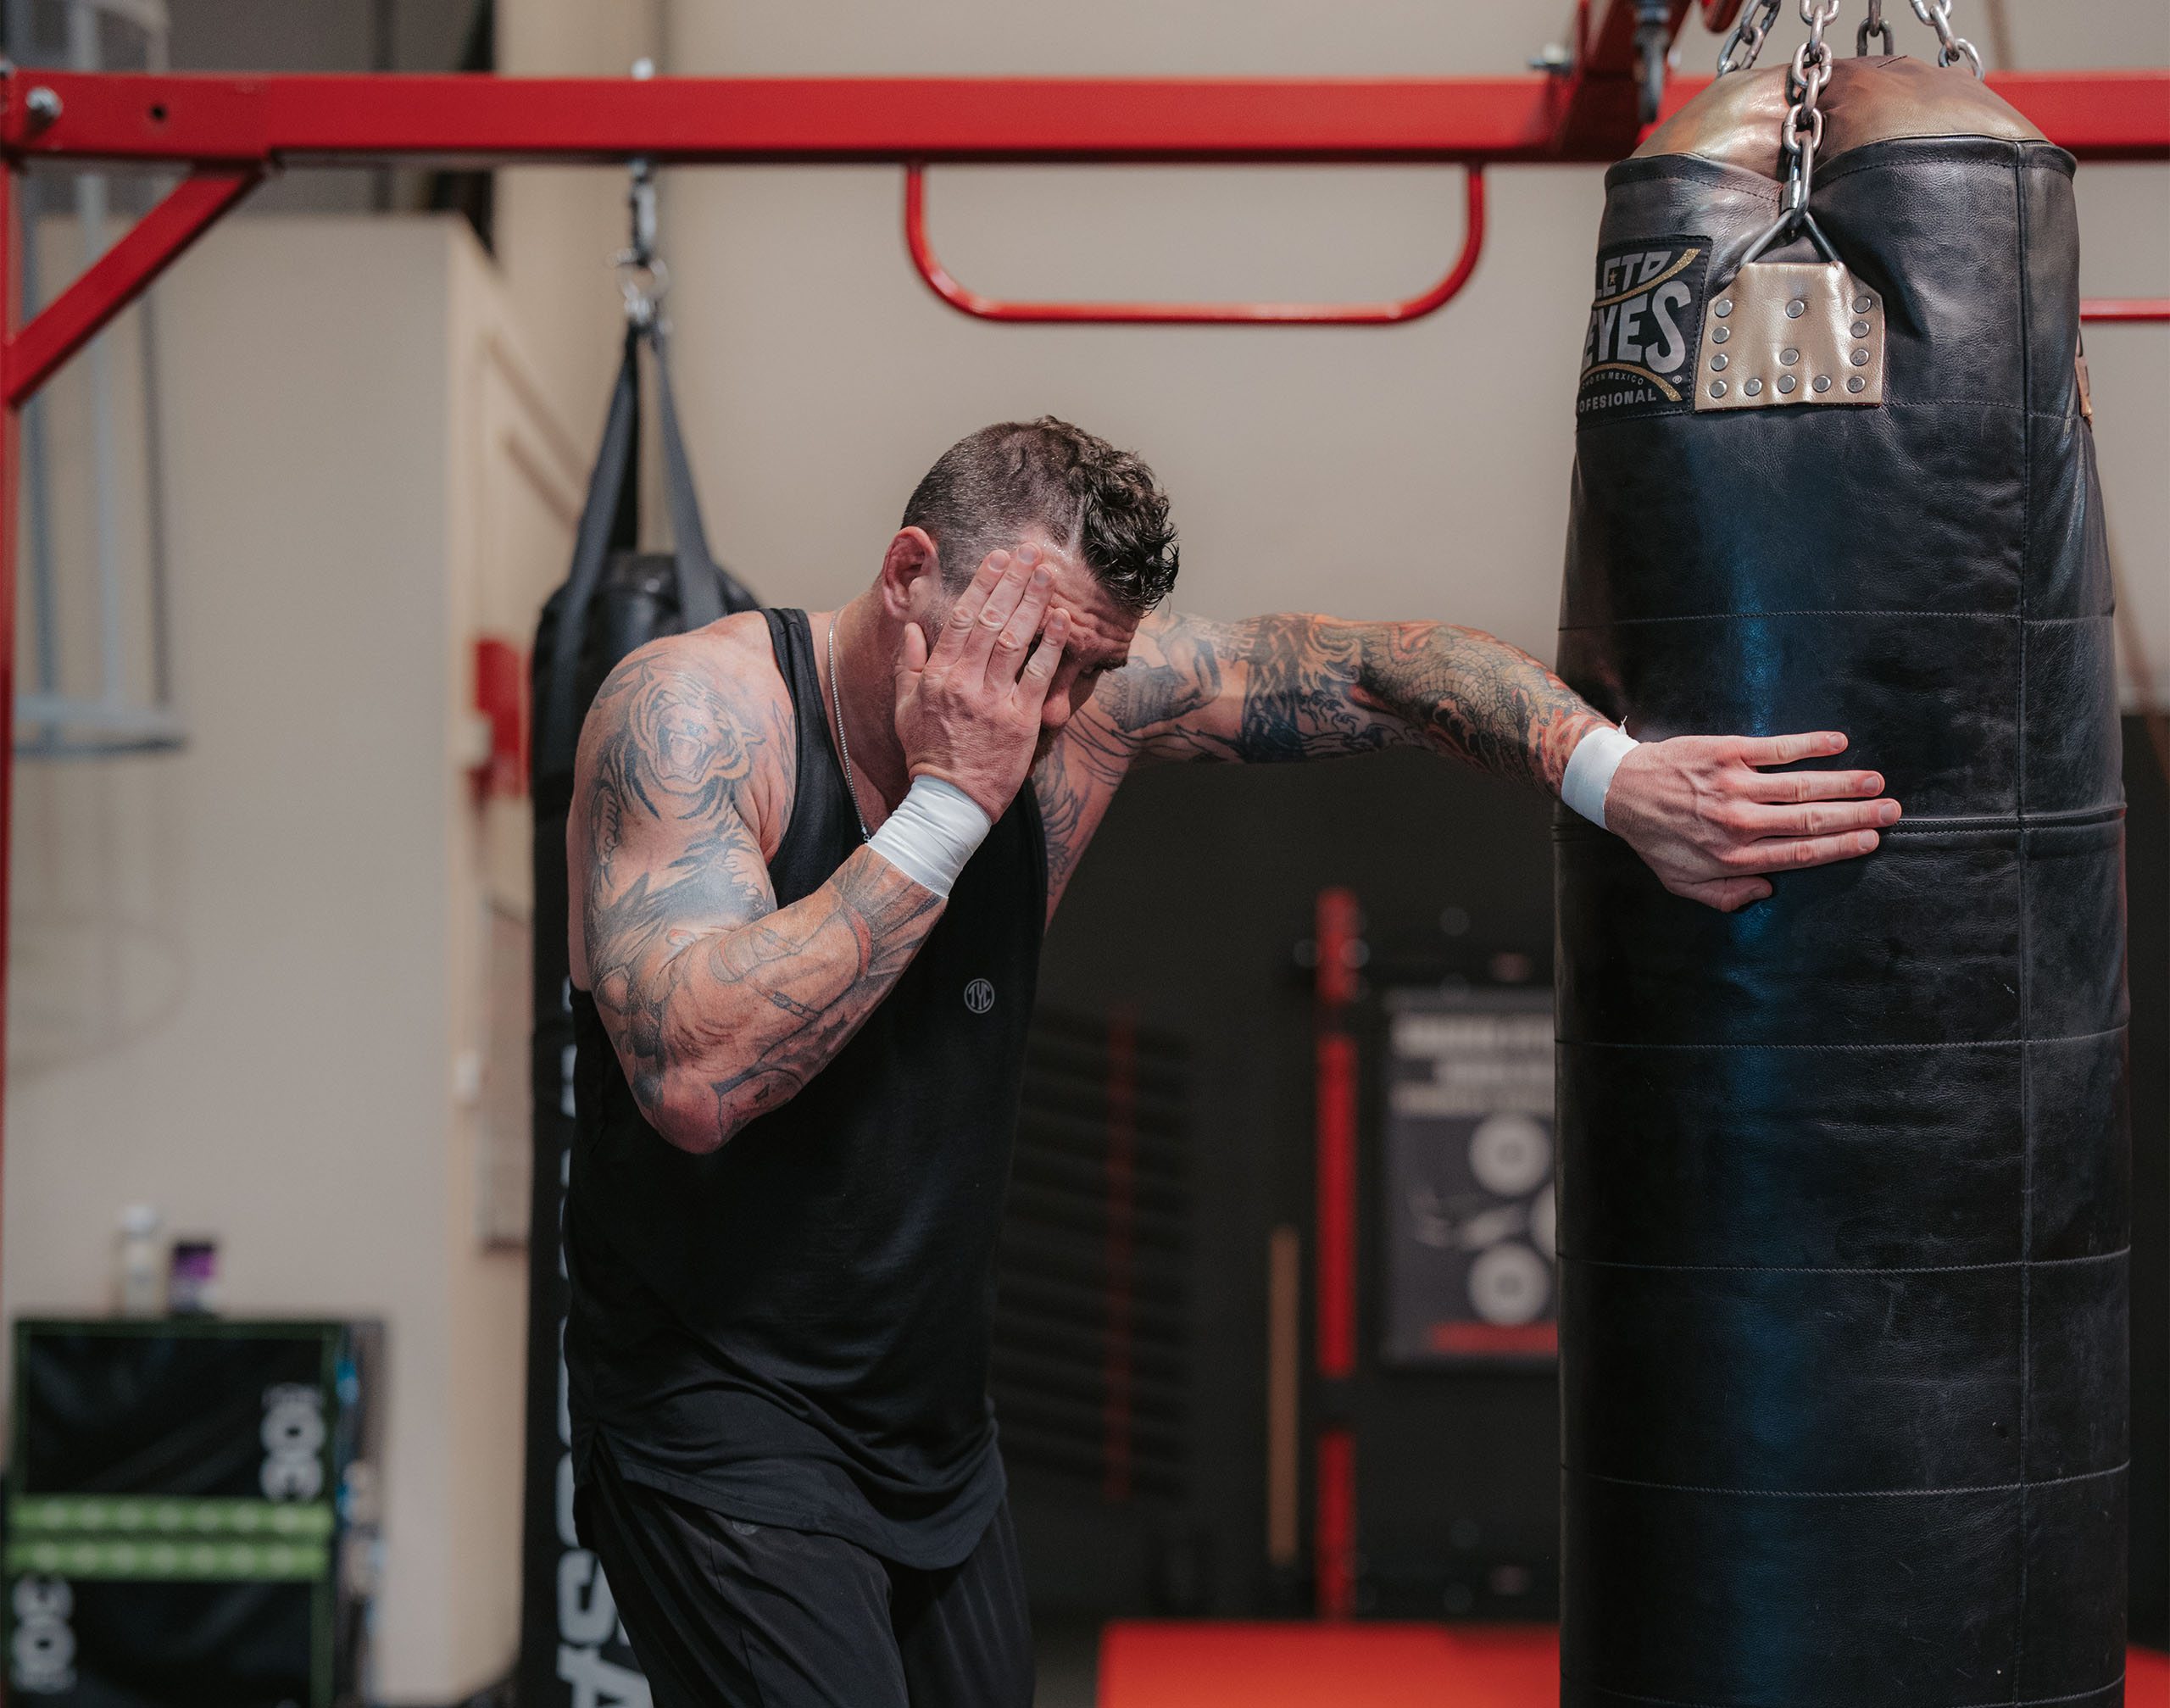 Chris Camozzi working with the punching bag